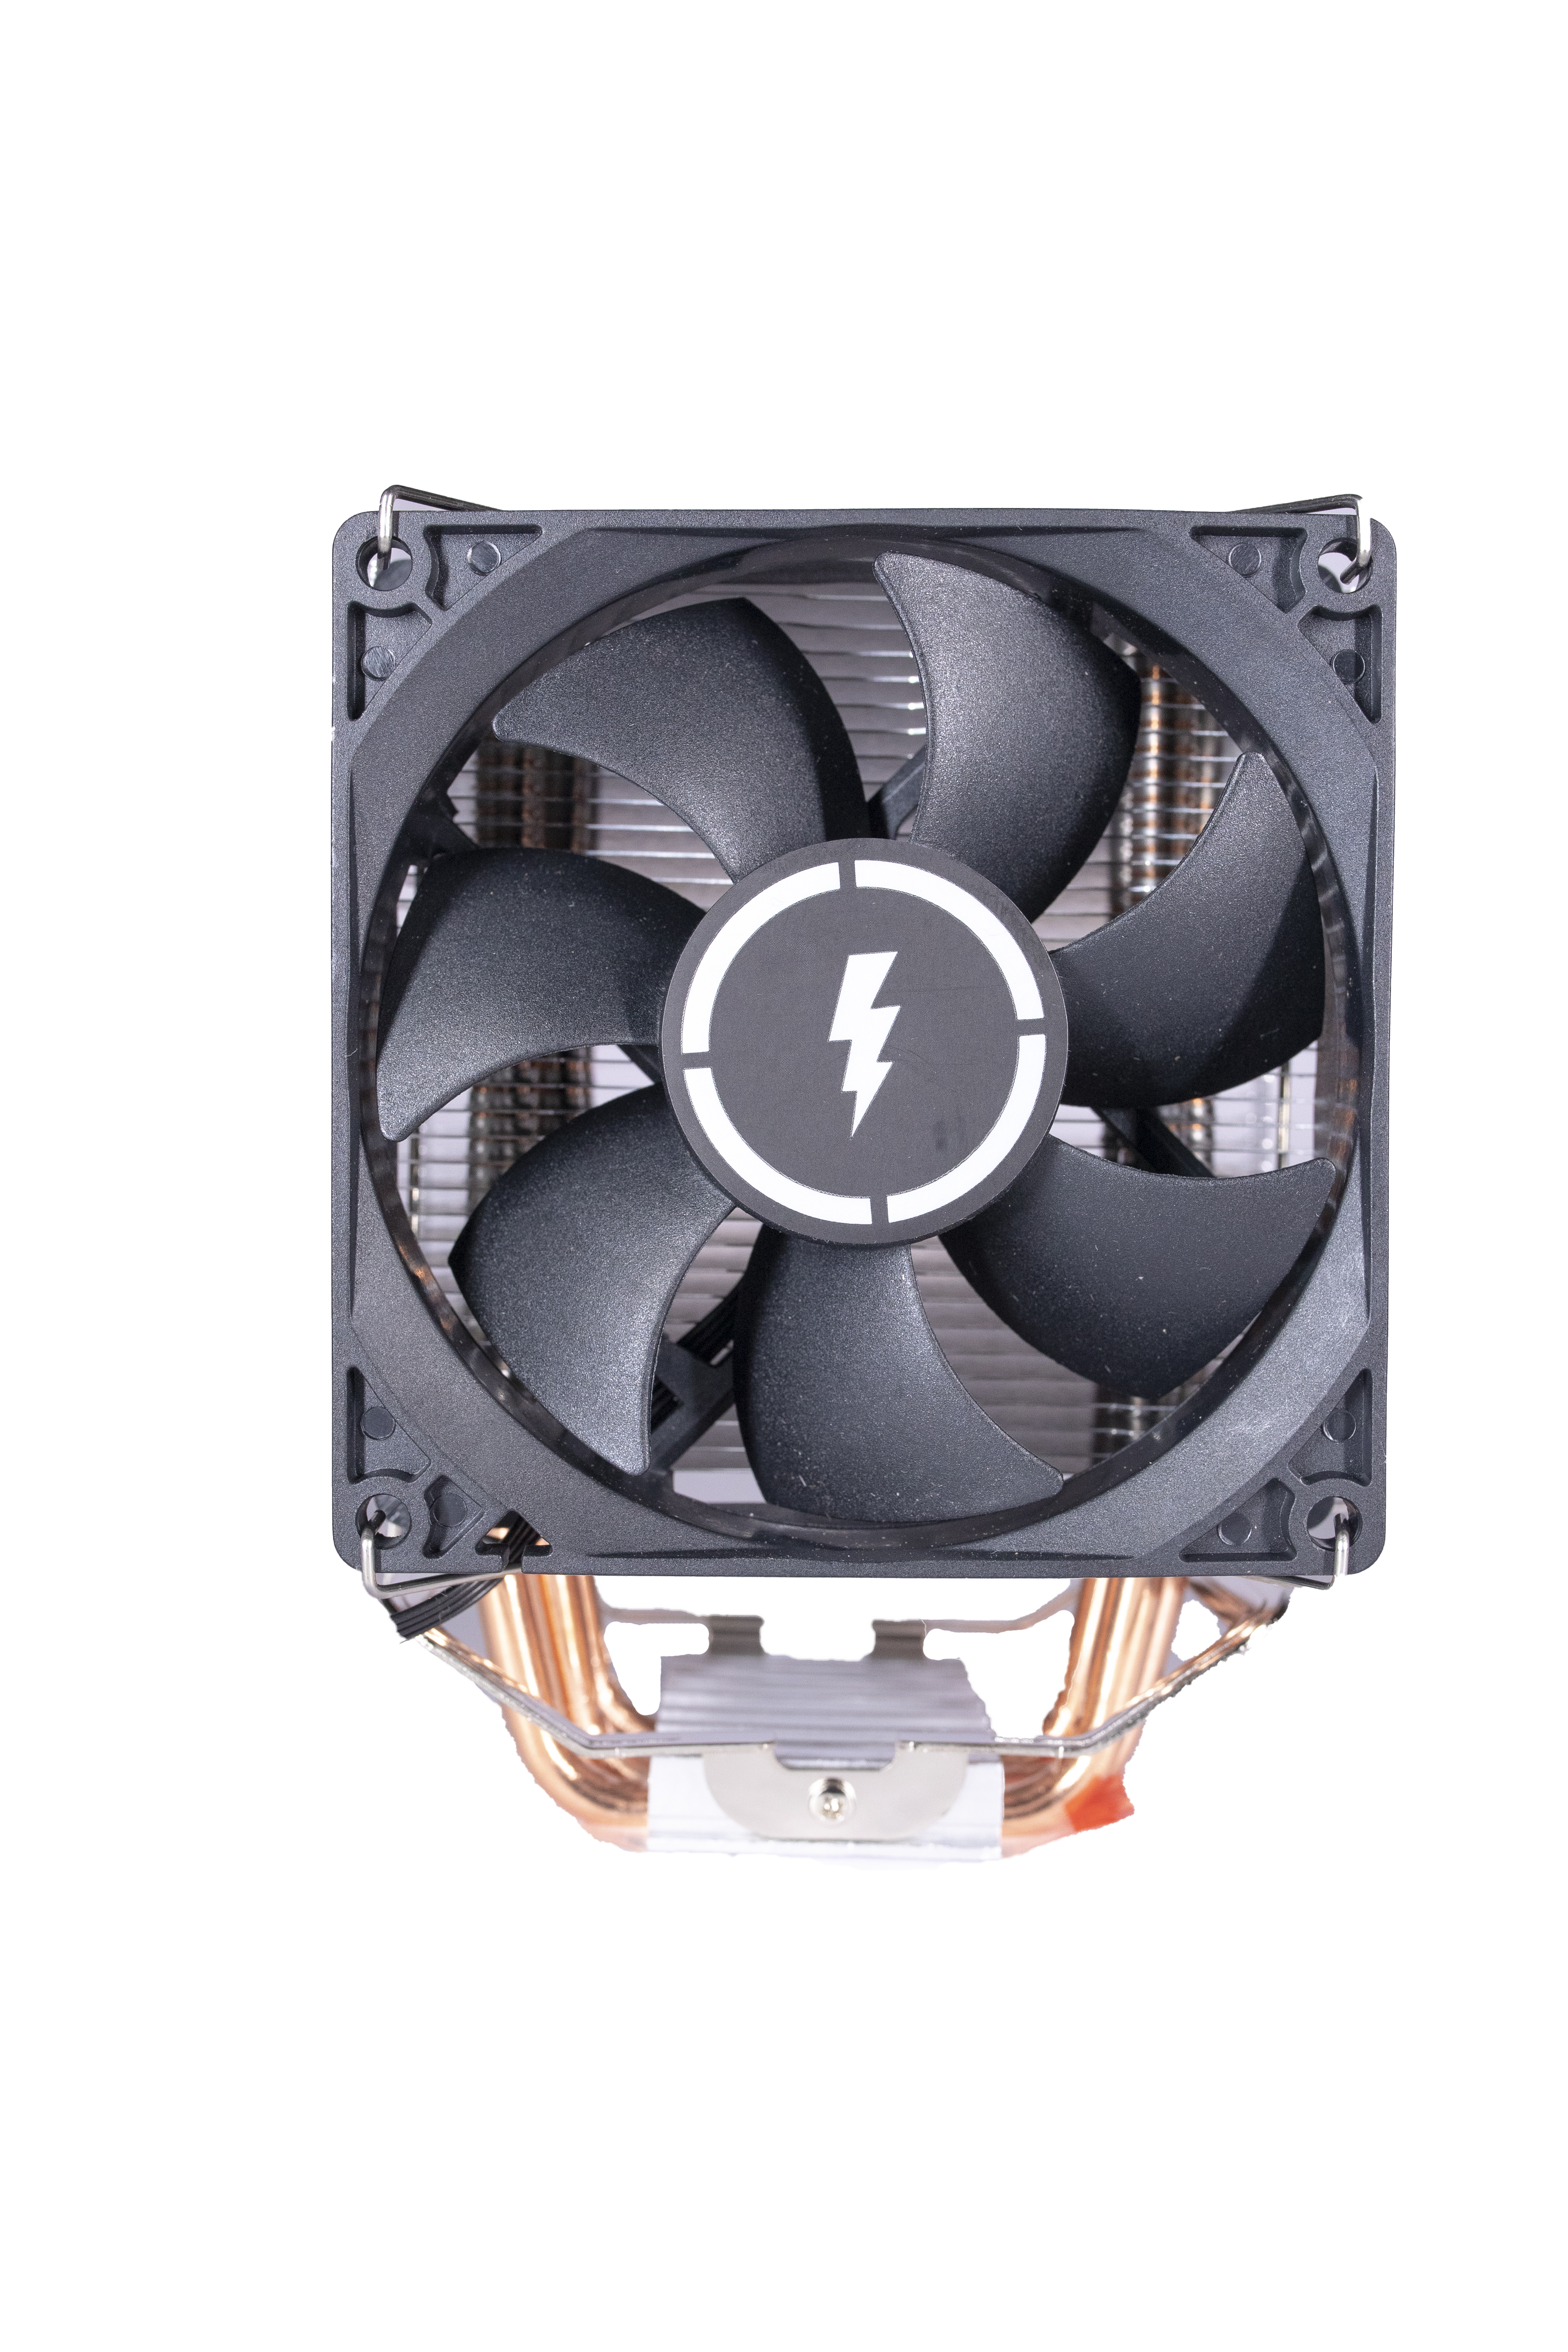 Volted Cool 210 CPU Air Cooler